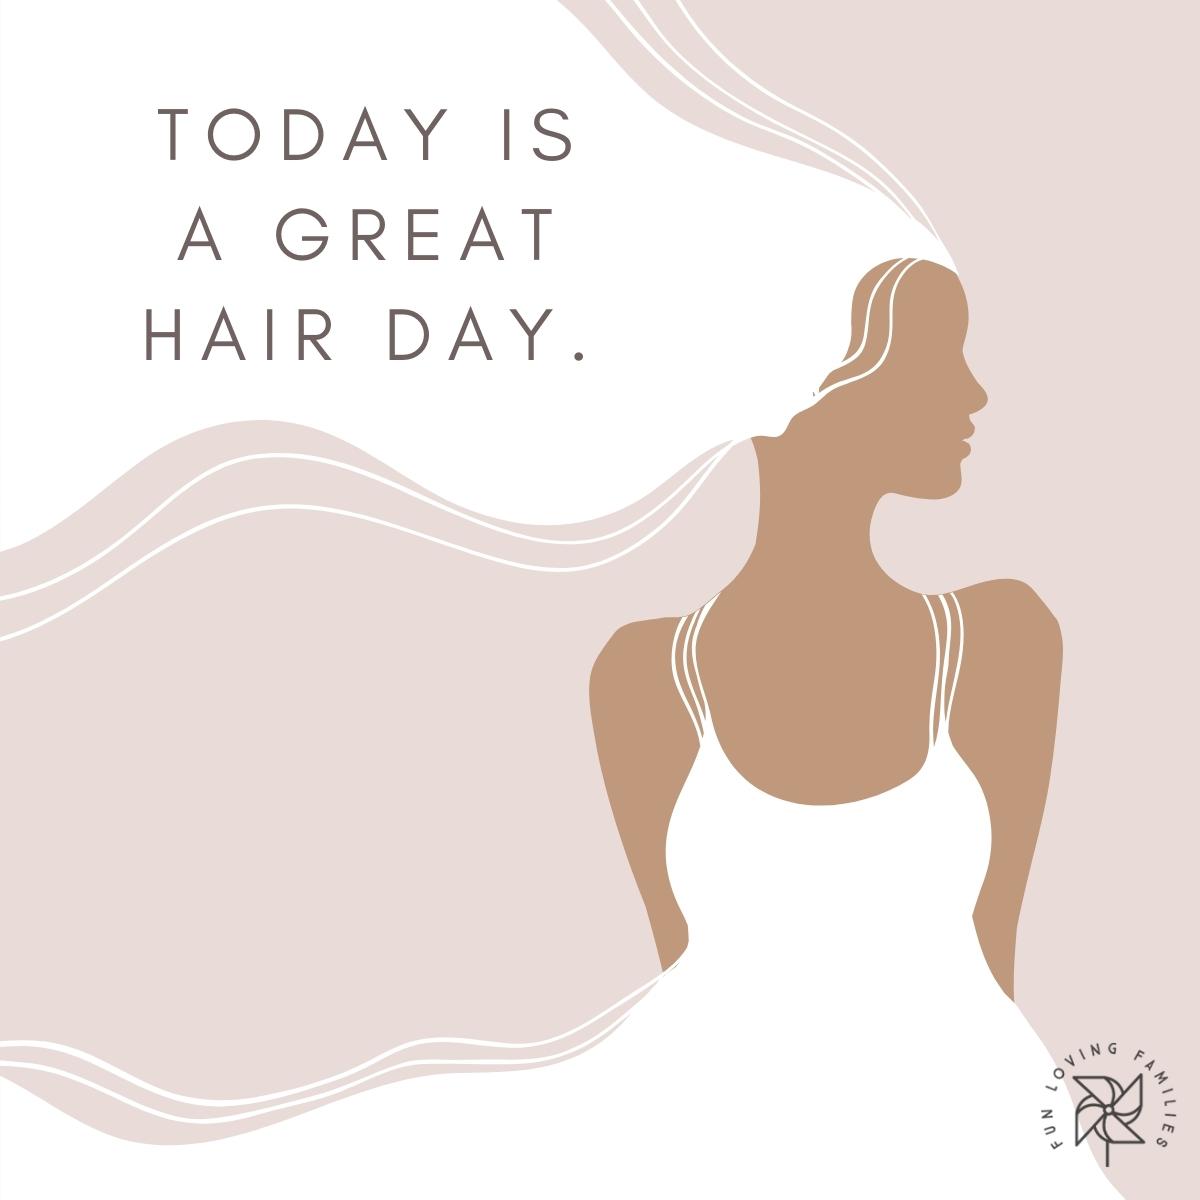 Today is a great hair day affirmation